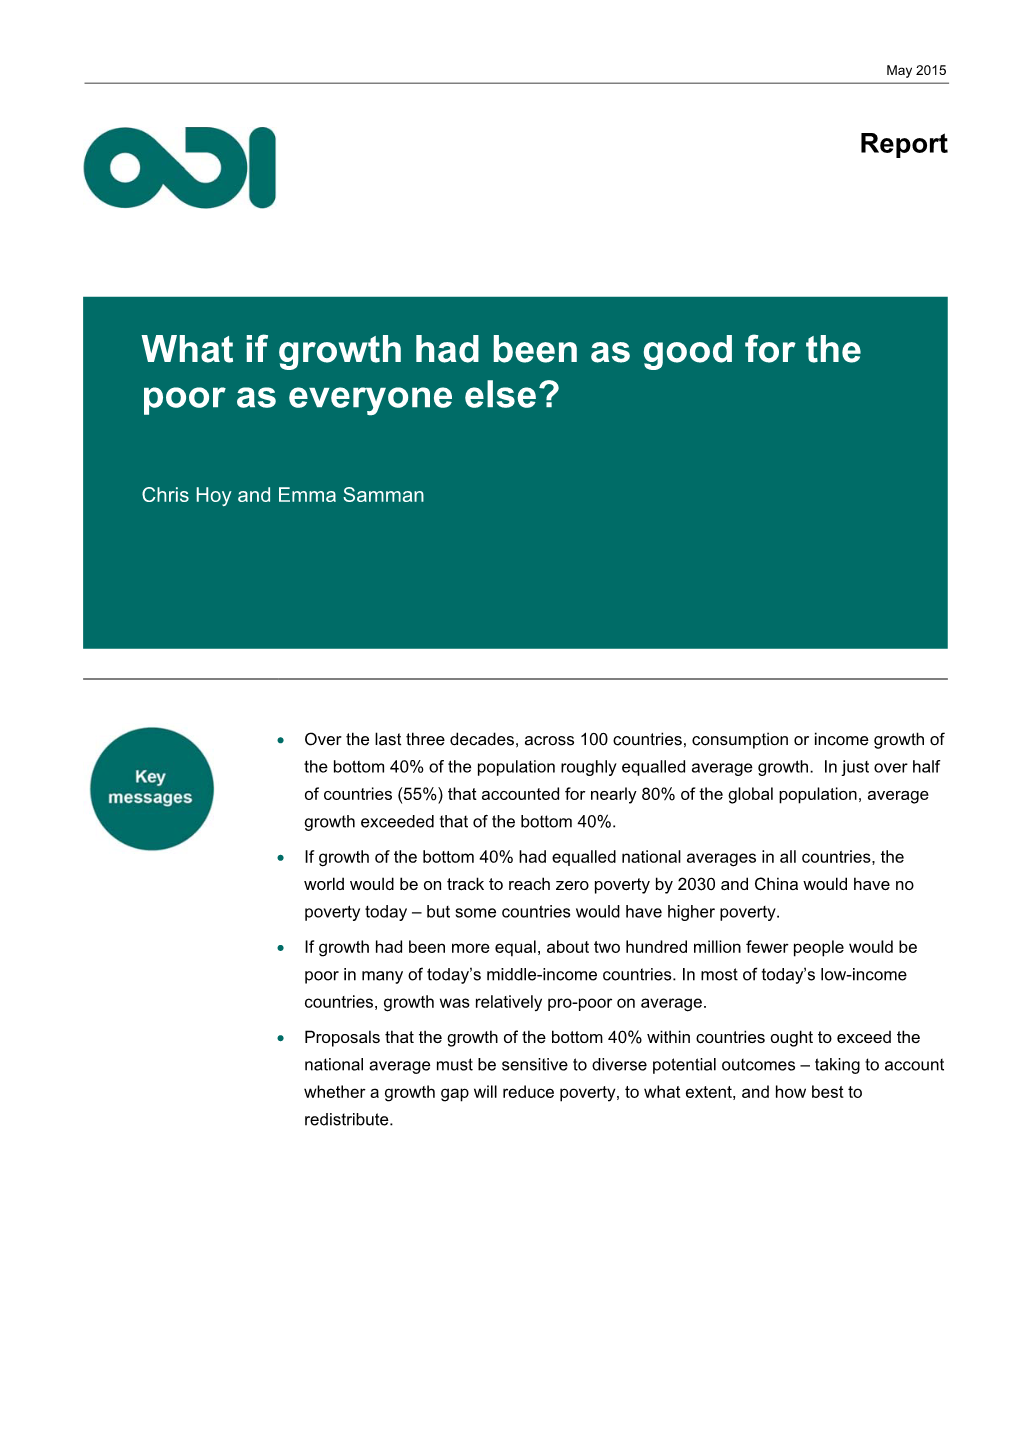 What If Growth Had Been As Good for the Poor As Everyone Else?